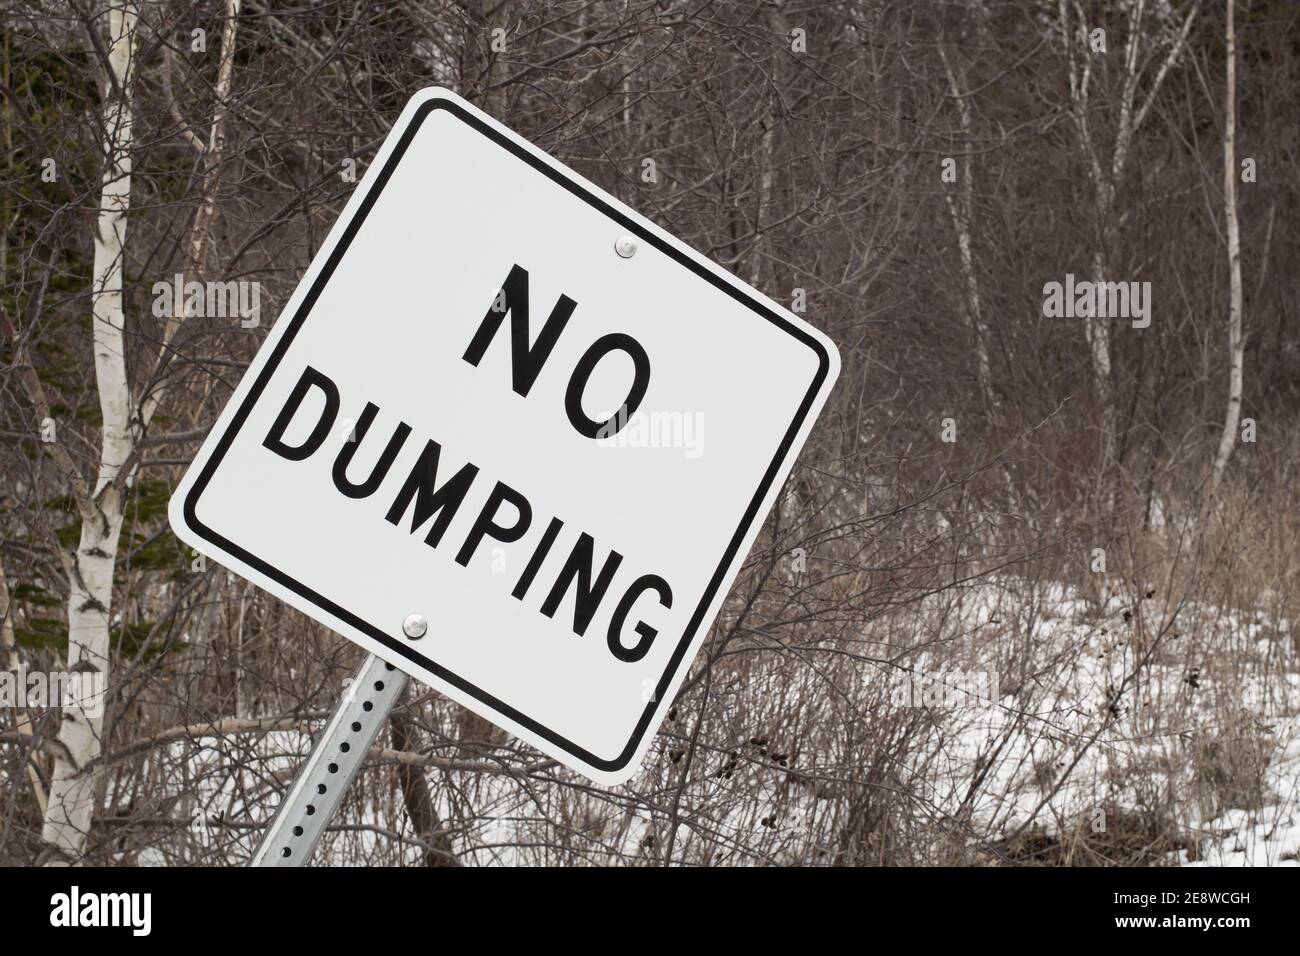 No dumping sign in rural area Stock Photo